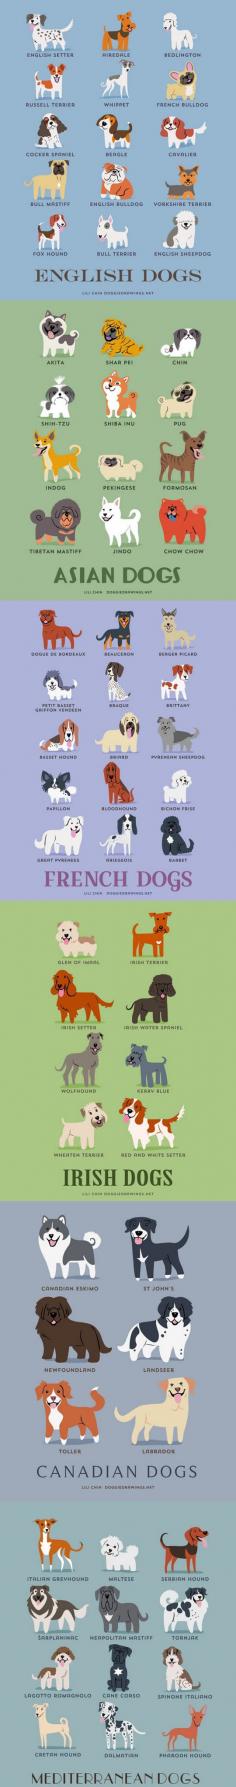 Dogs Of The World. #Animals #Breeds #Chart #Dogs #World